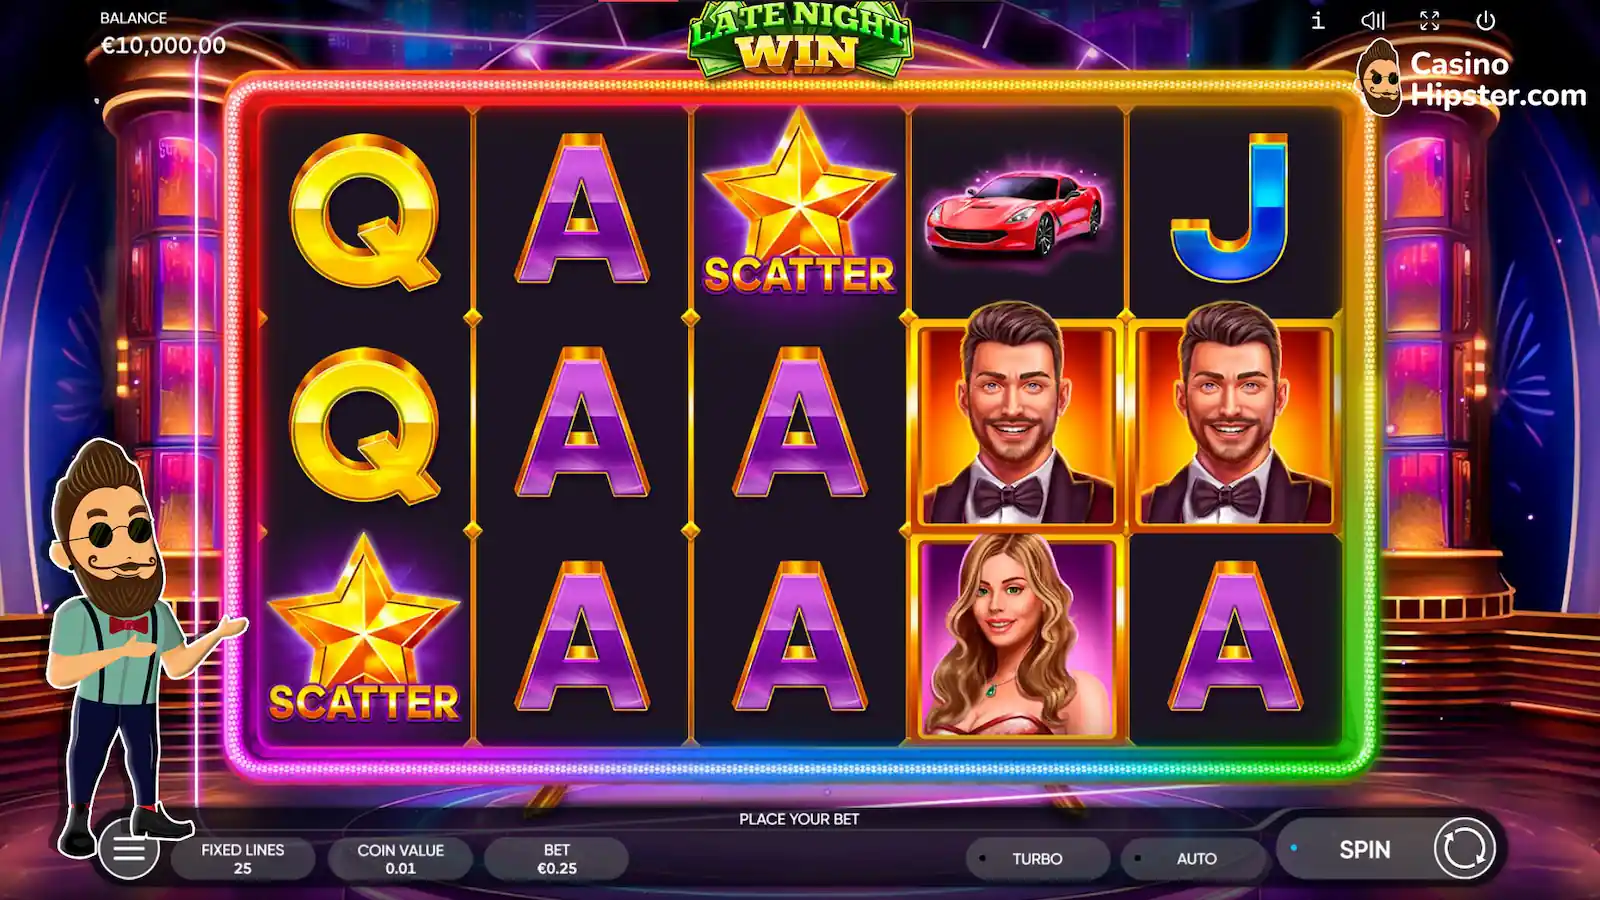 Late Night Win Slot Review